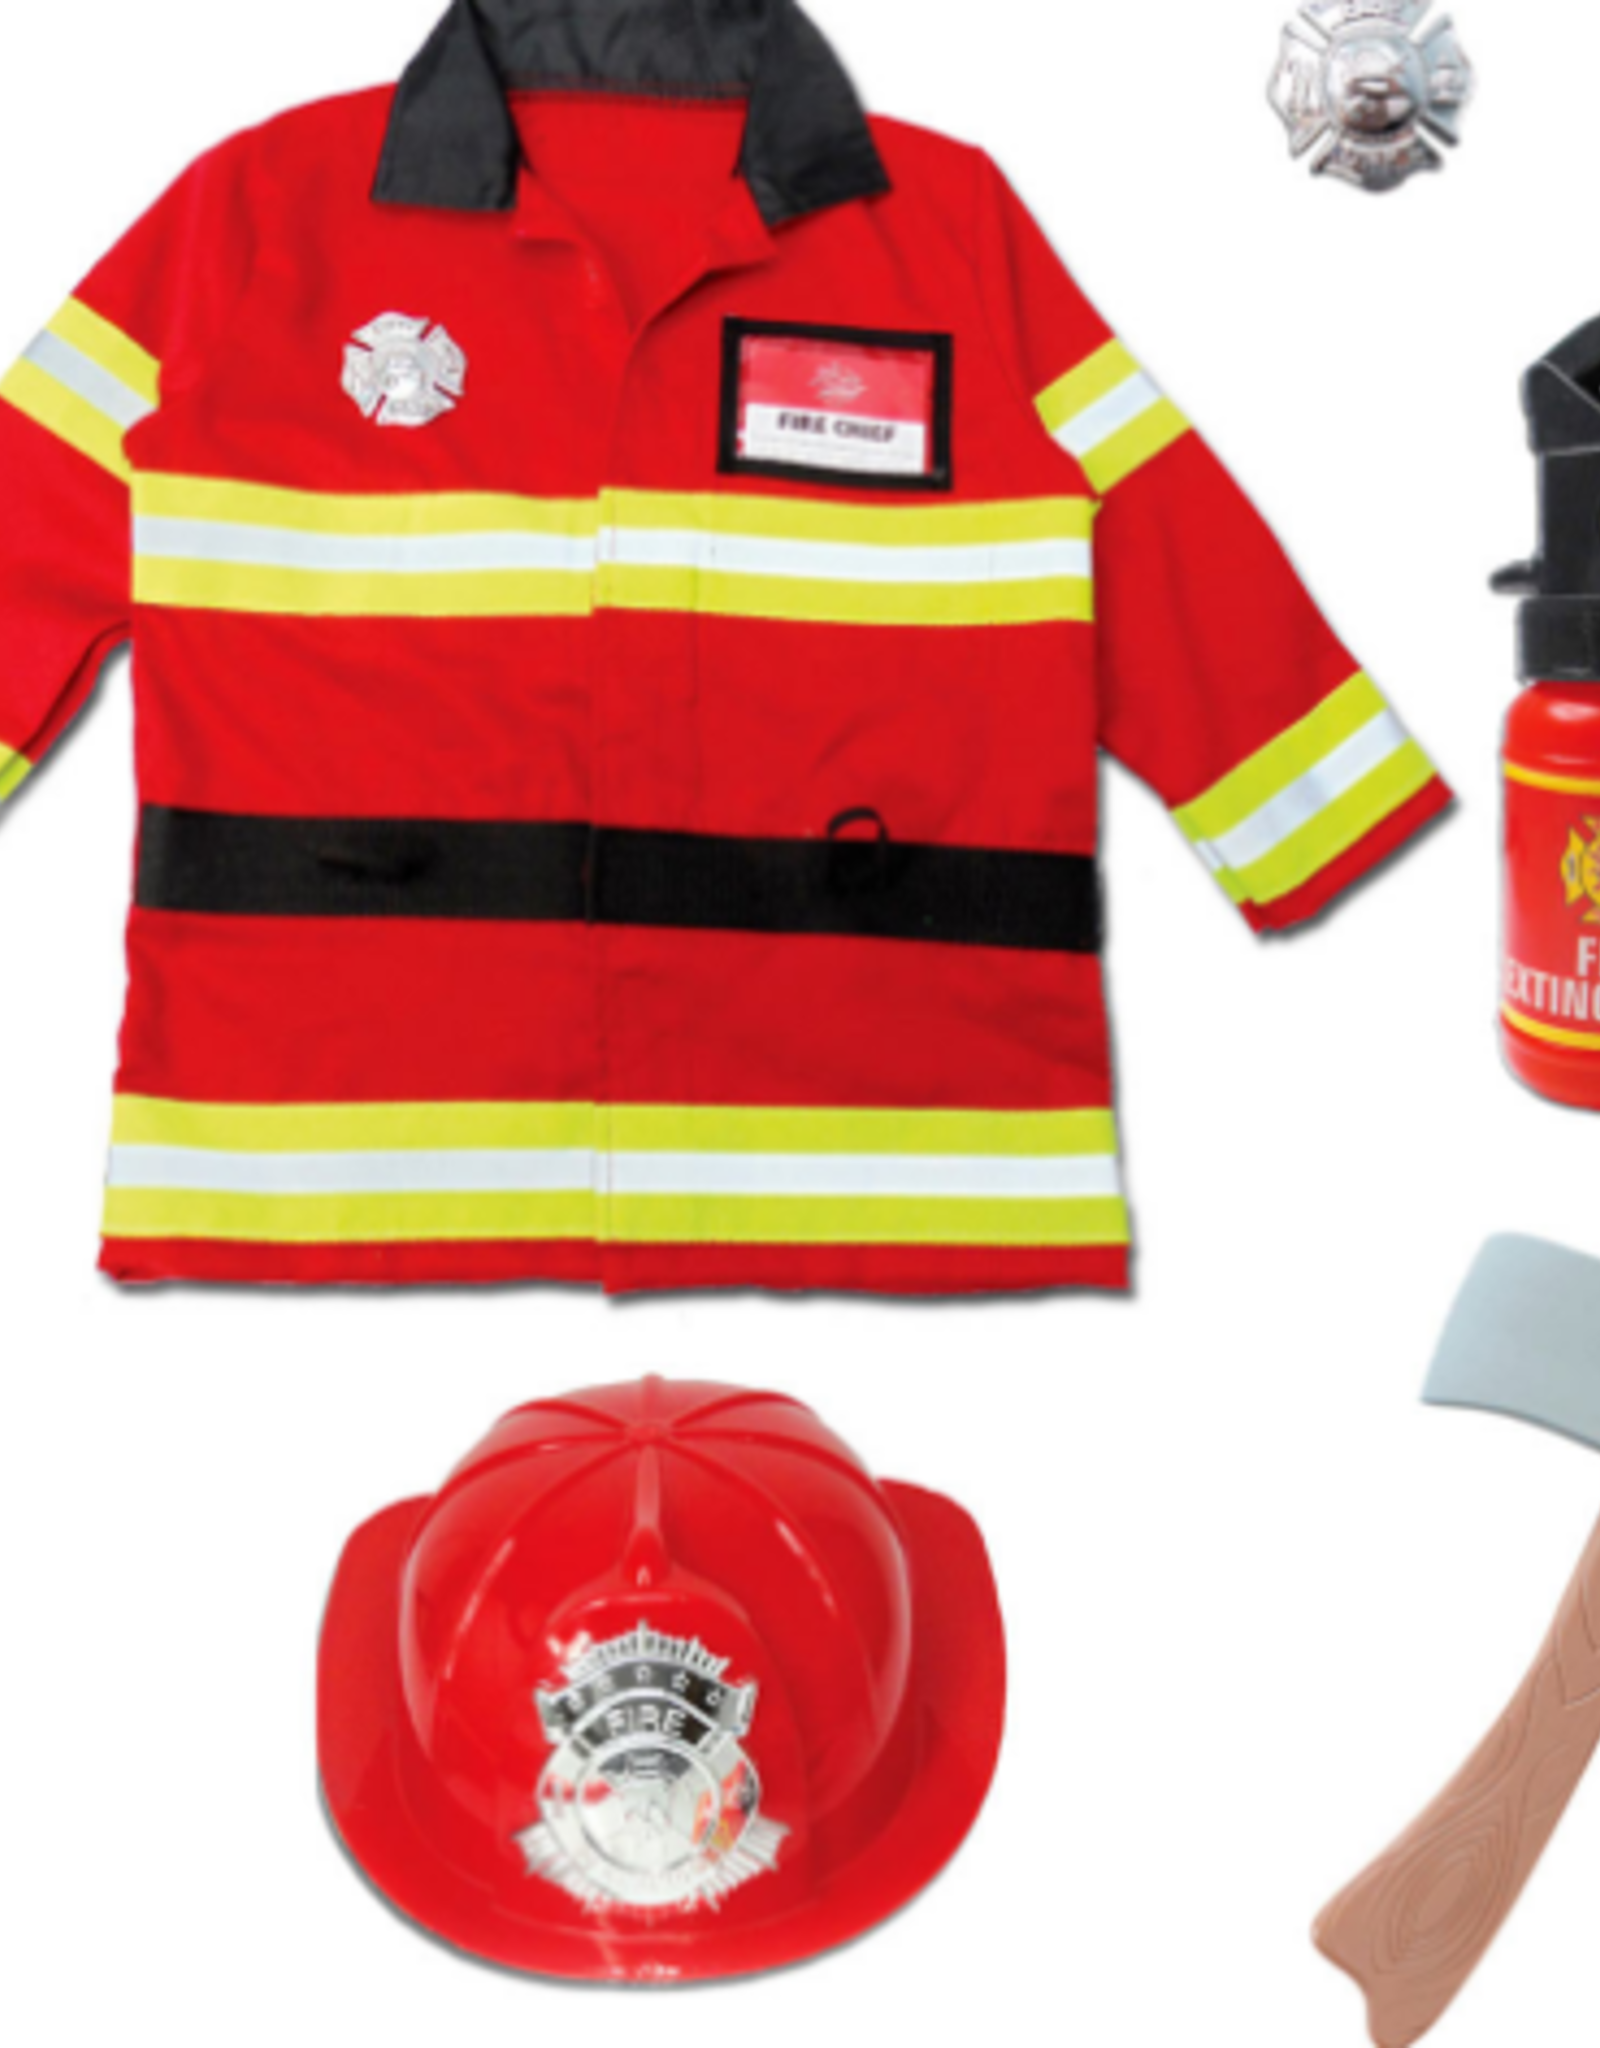 CREATIVE EDUCATION OF CANADA / GREAT PRETENDERS FIREFIGHTER SET  3-4